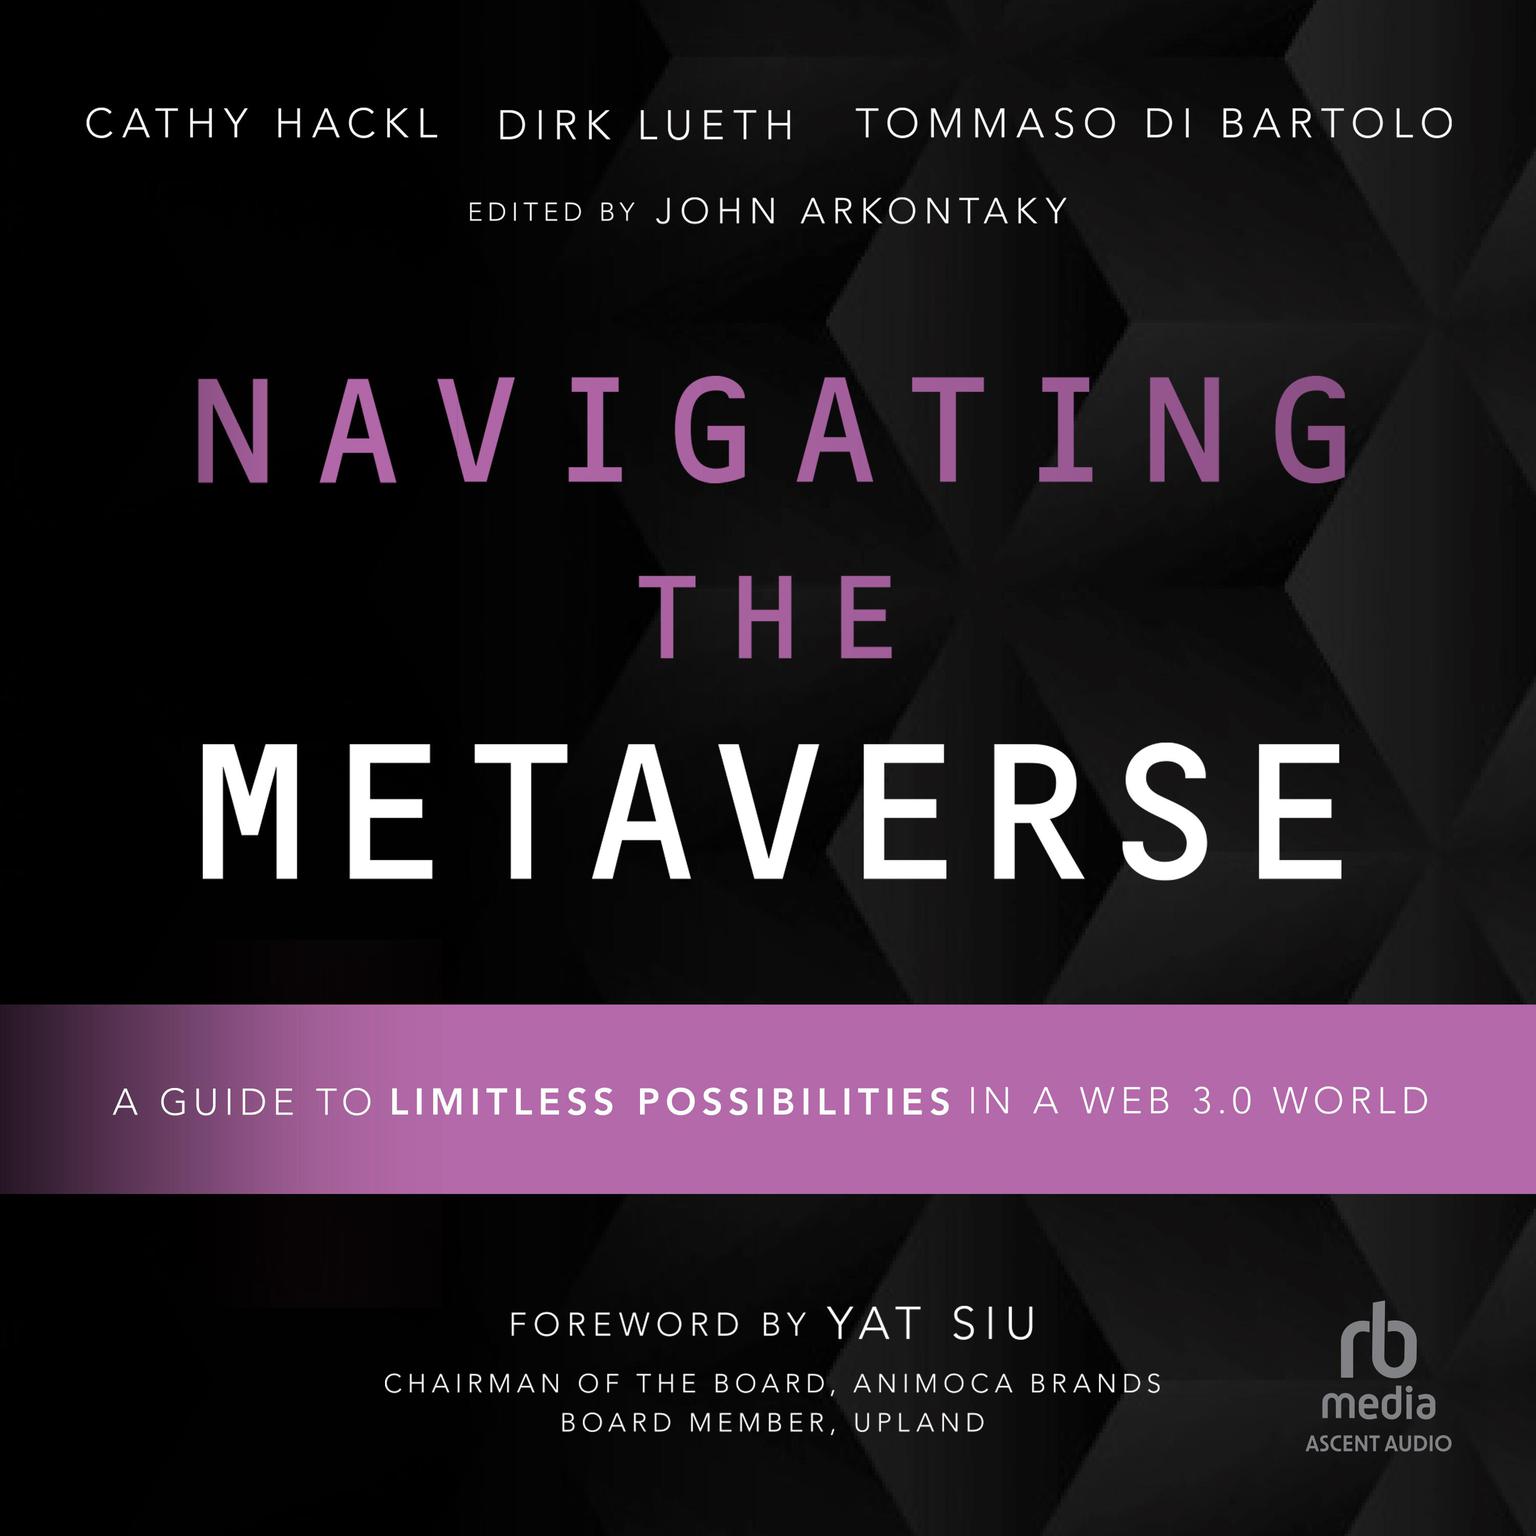 Navigating the Metaverse: A Guide to Limitless Possibilities in a Web 3.0 World Audiobook, by Cathy Hackl